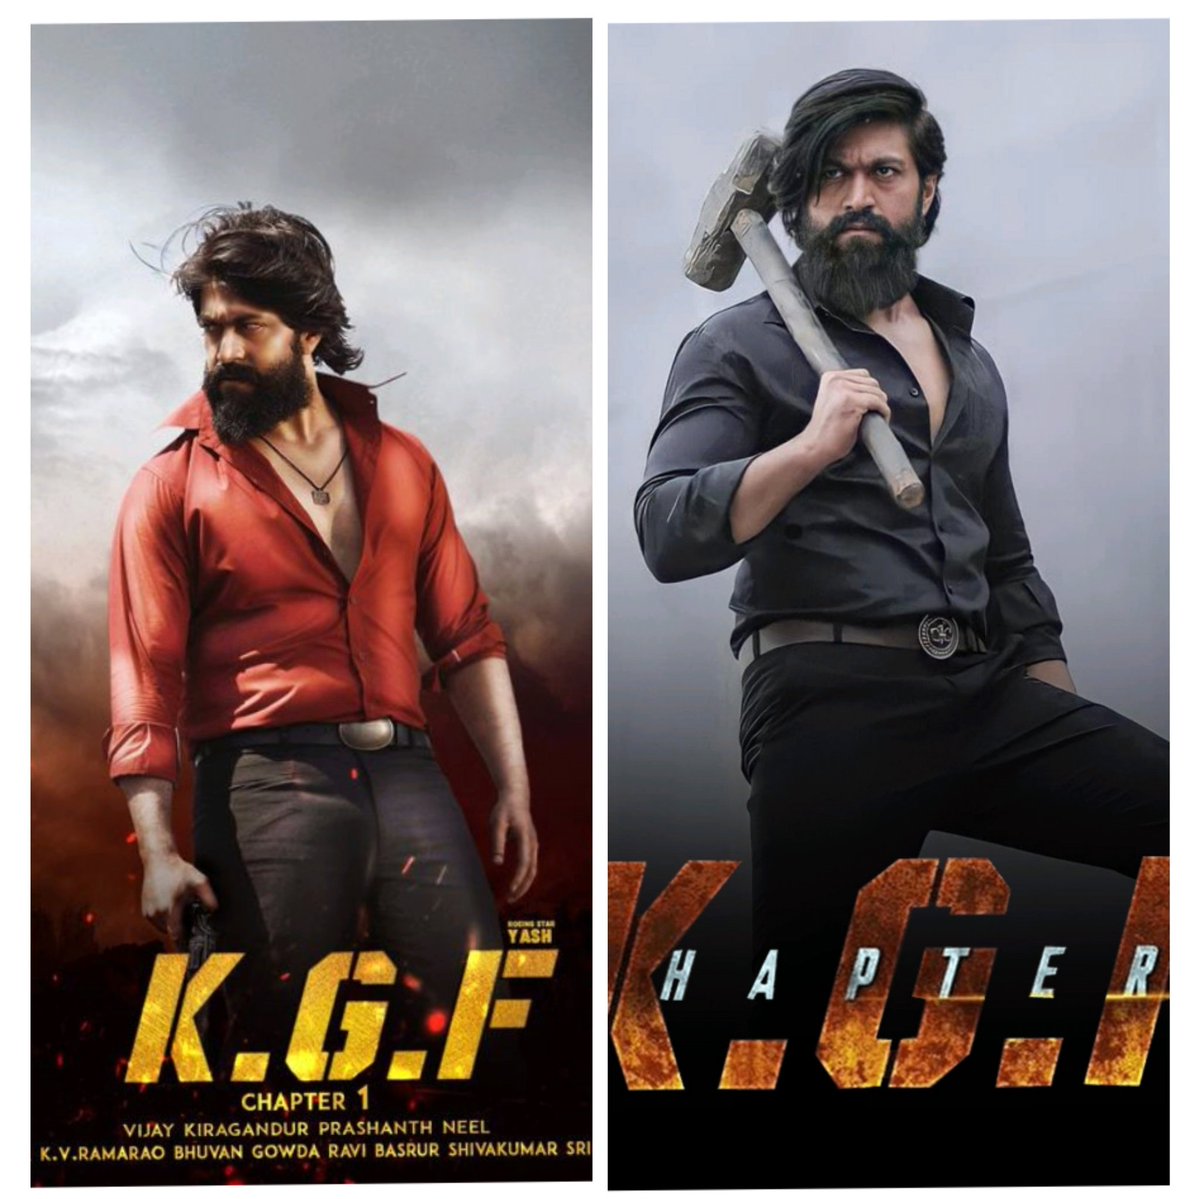 Raise to rule transfermation.
#Kgf :- just costumes change 
#Pushpa :- customs+look +mannerisms+attitude and many details in charector. 
Why I love #sukumar film making. 
#pusha Have nativity, related emotions, strong love, periodic details. Acting potential charector #alluarjun